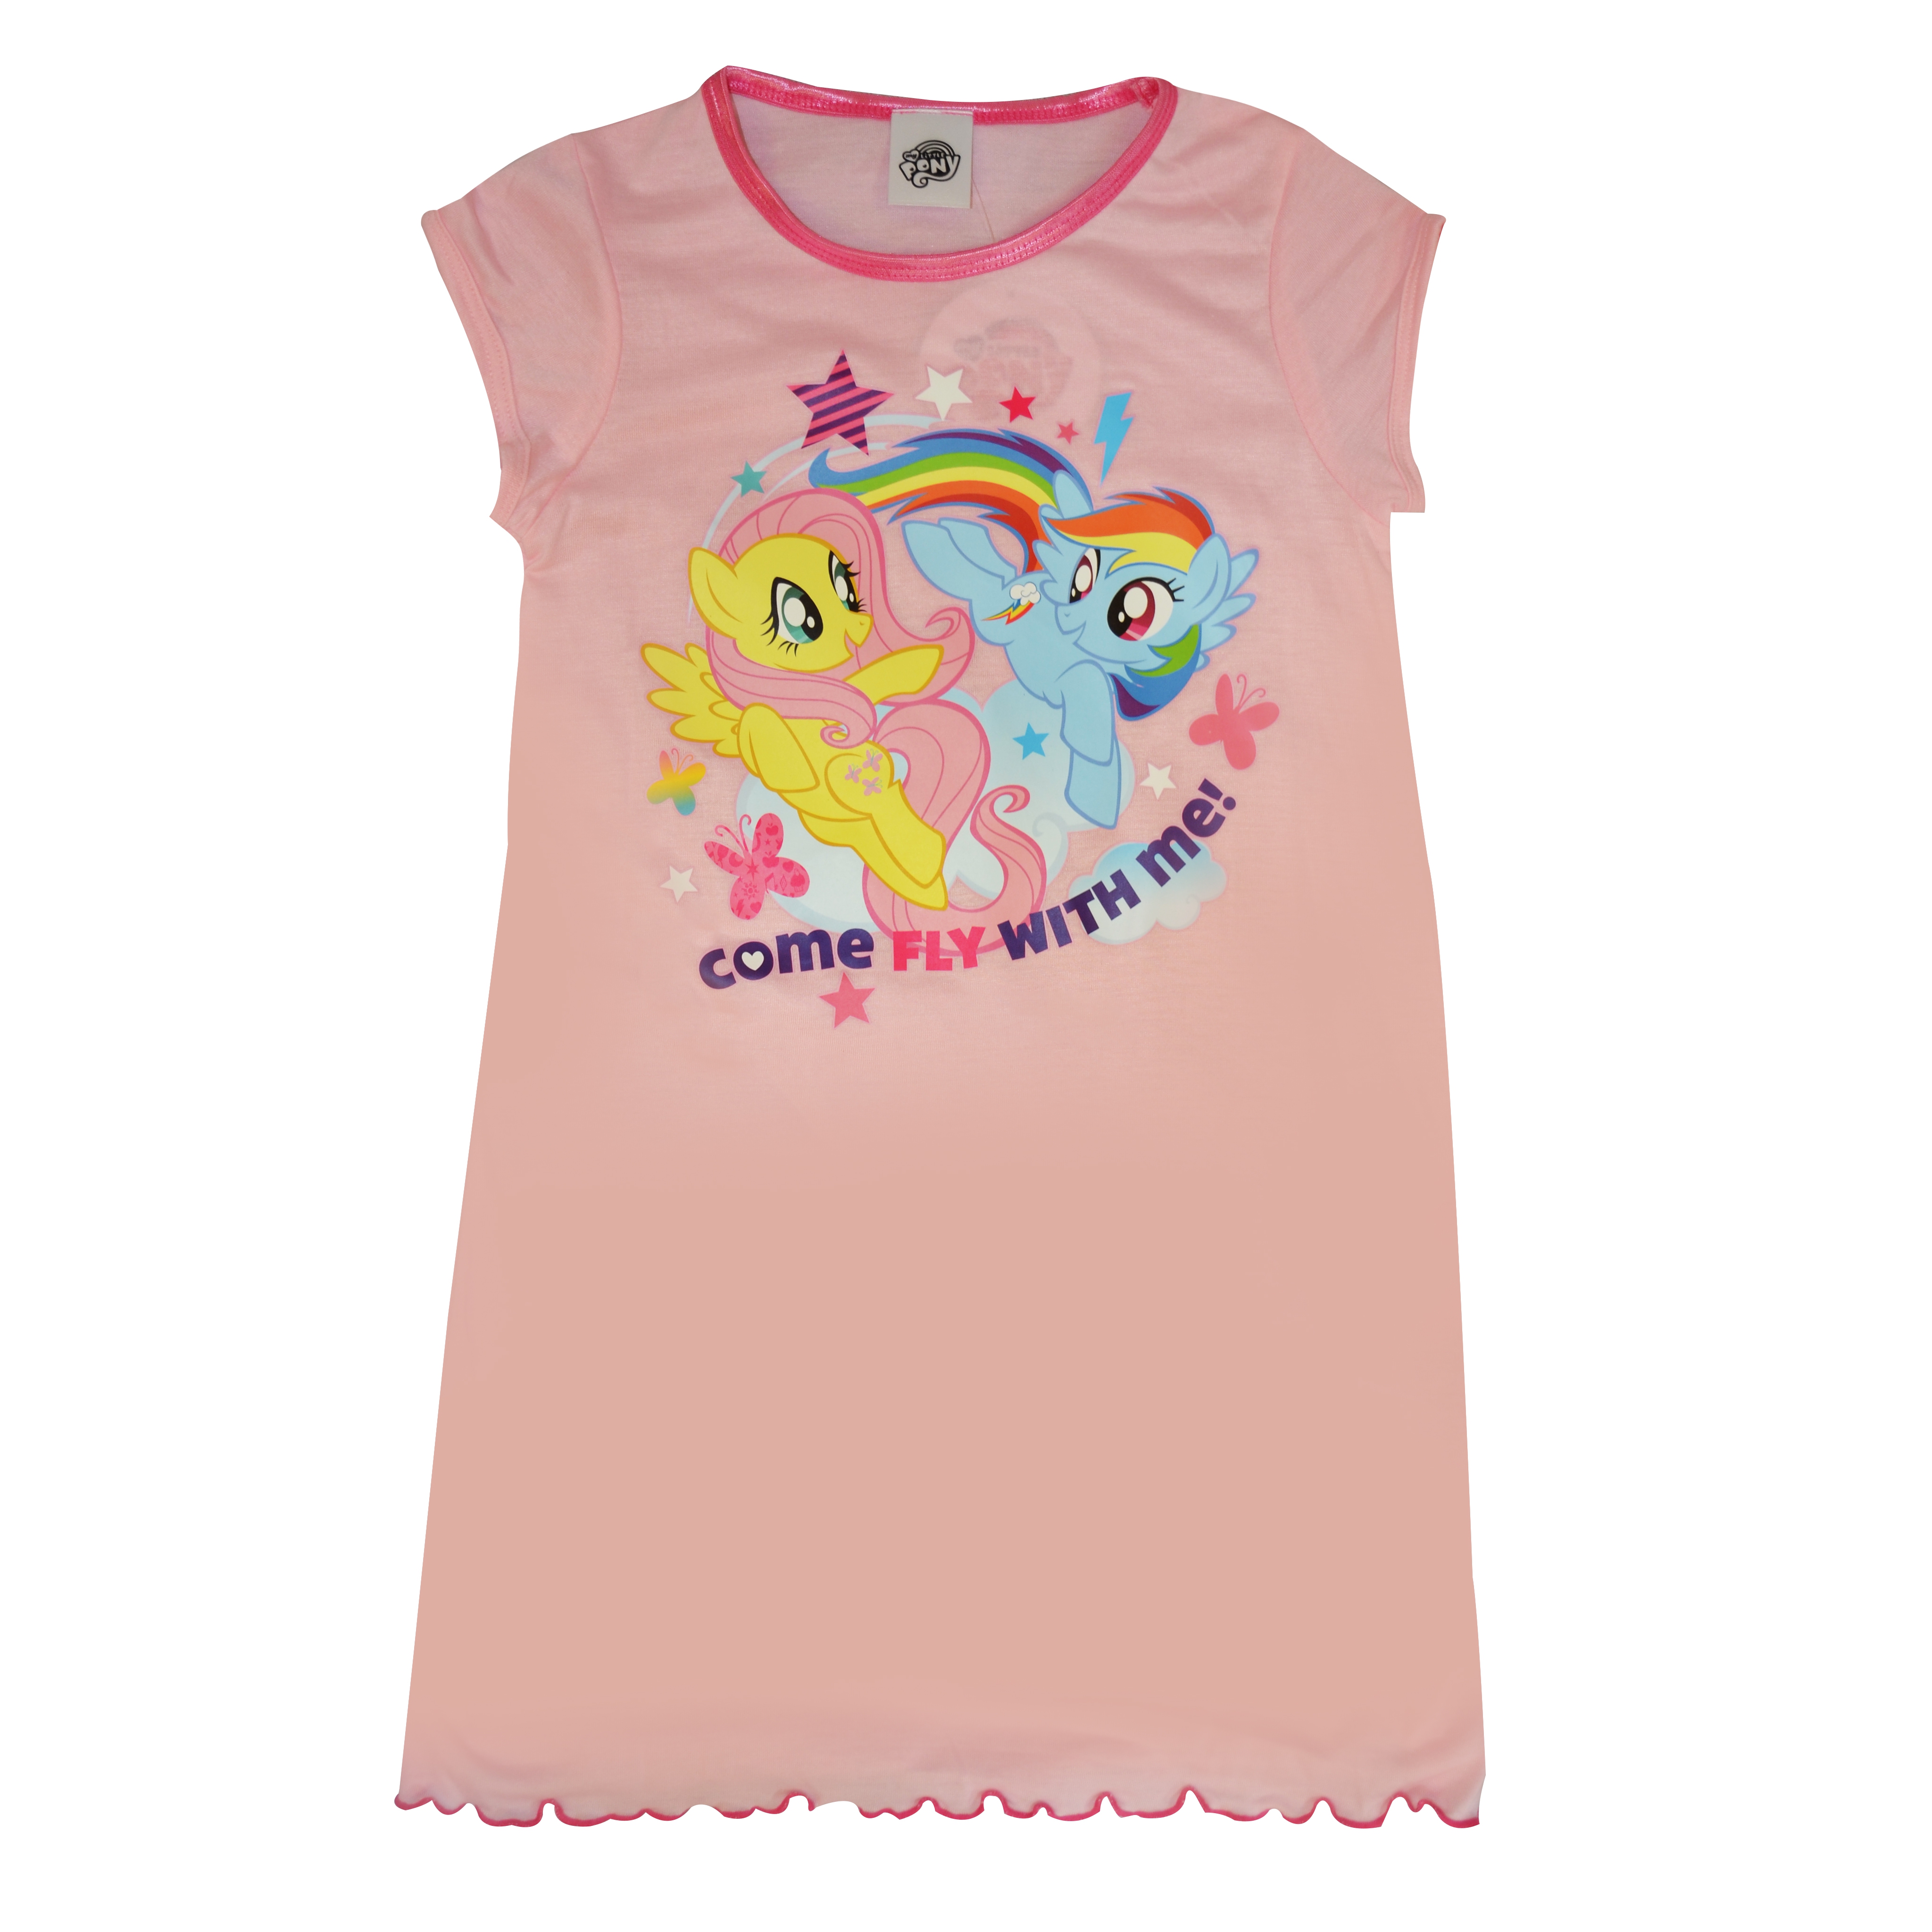 My Little Pony 'Come Fly with Me' 5-6 Years Nighty